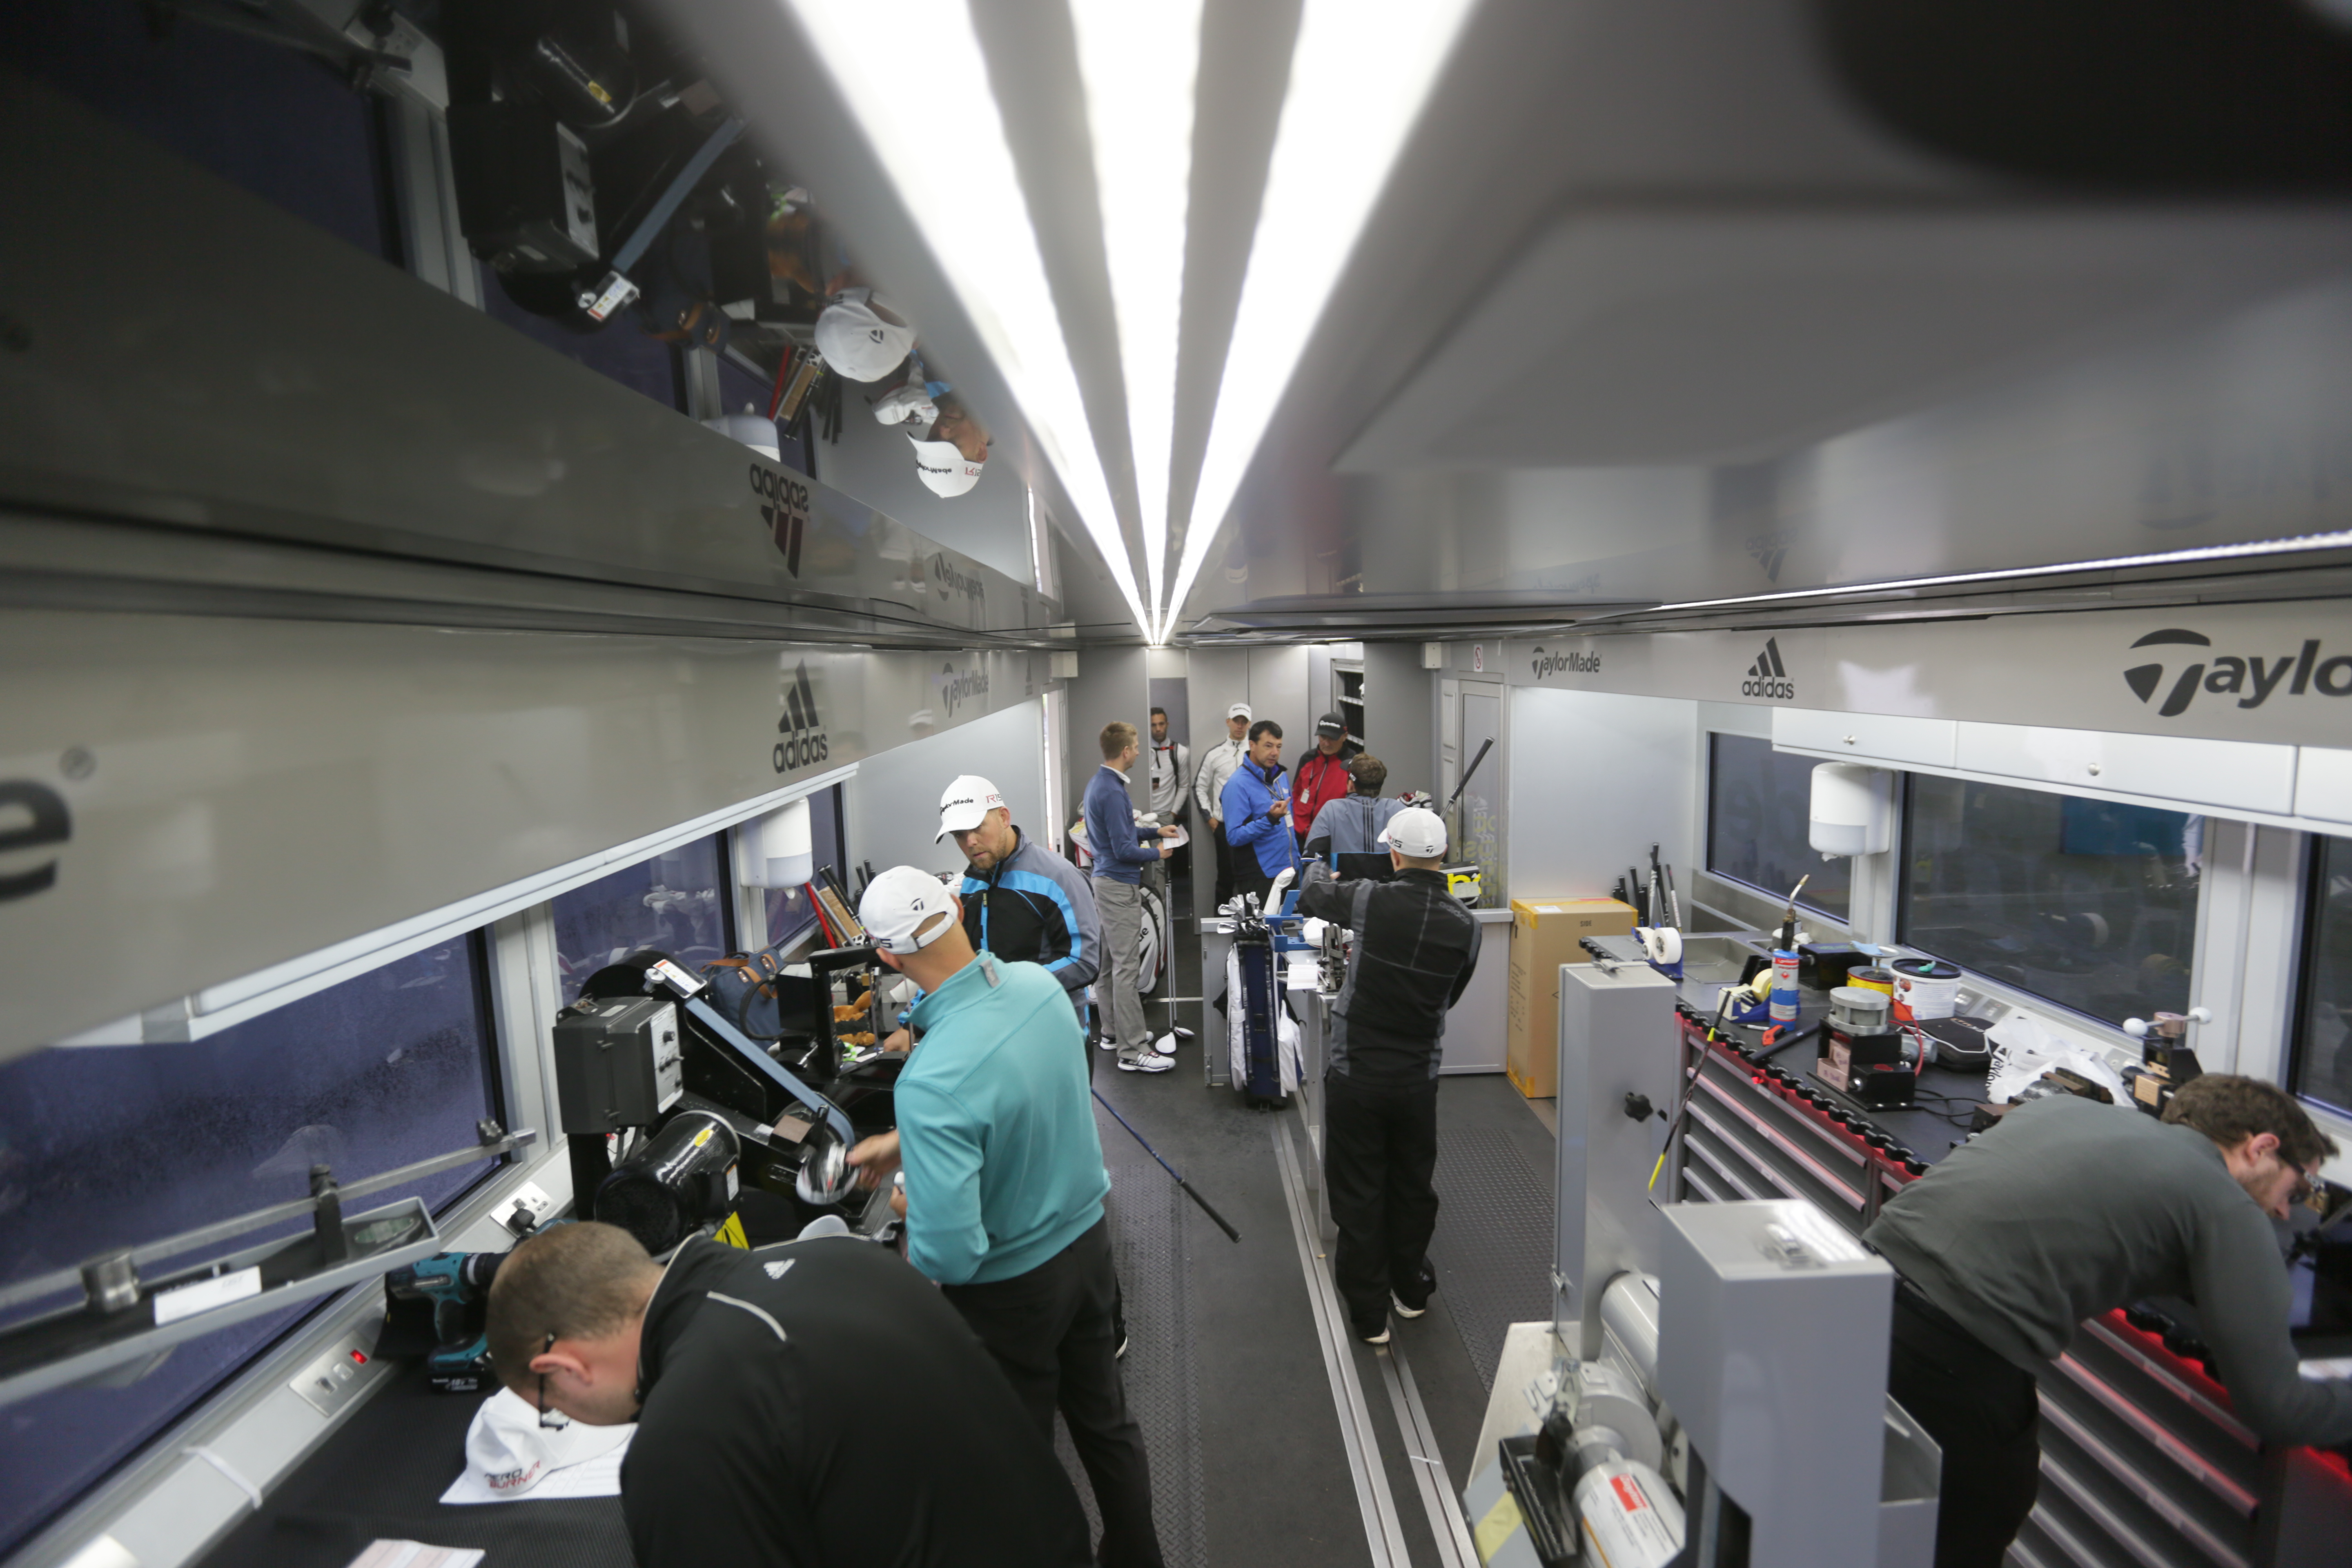 The cramped truck is a hive of activity (Photo: TaylorMade)